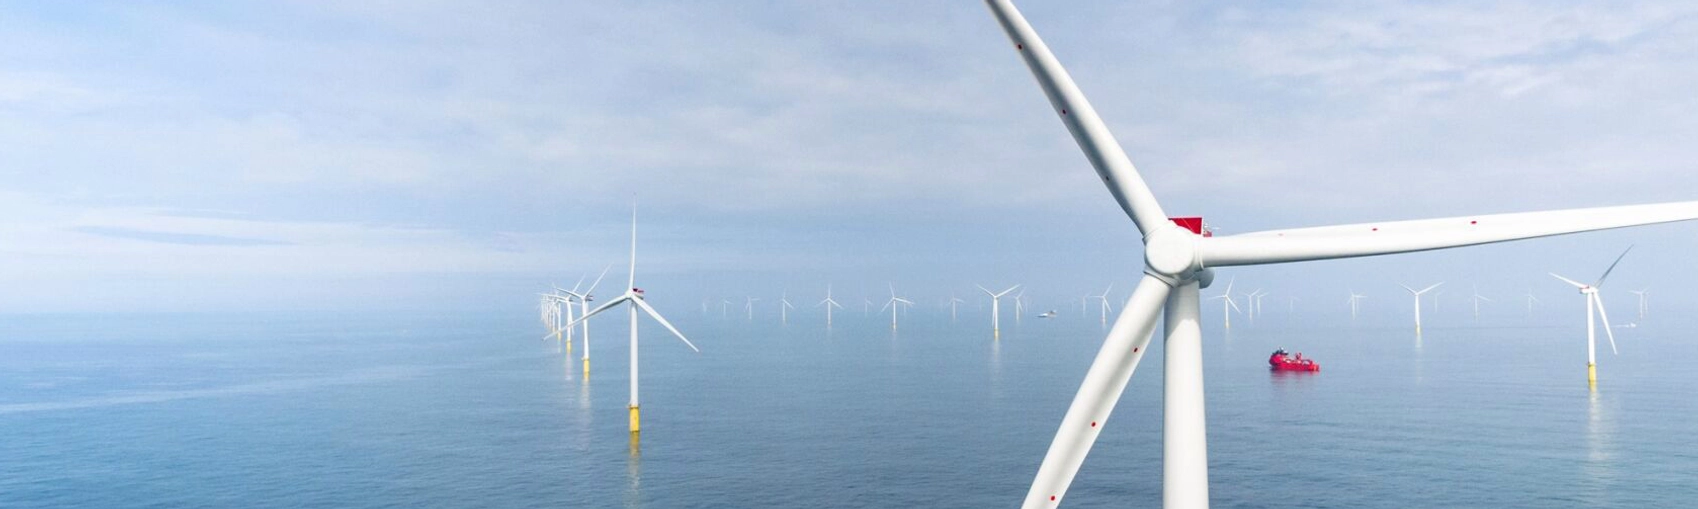 Equinor Approves to Expand Norfolk Offshore Wind Farms in UK